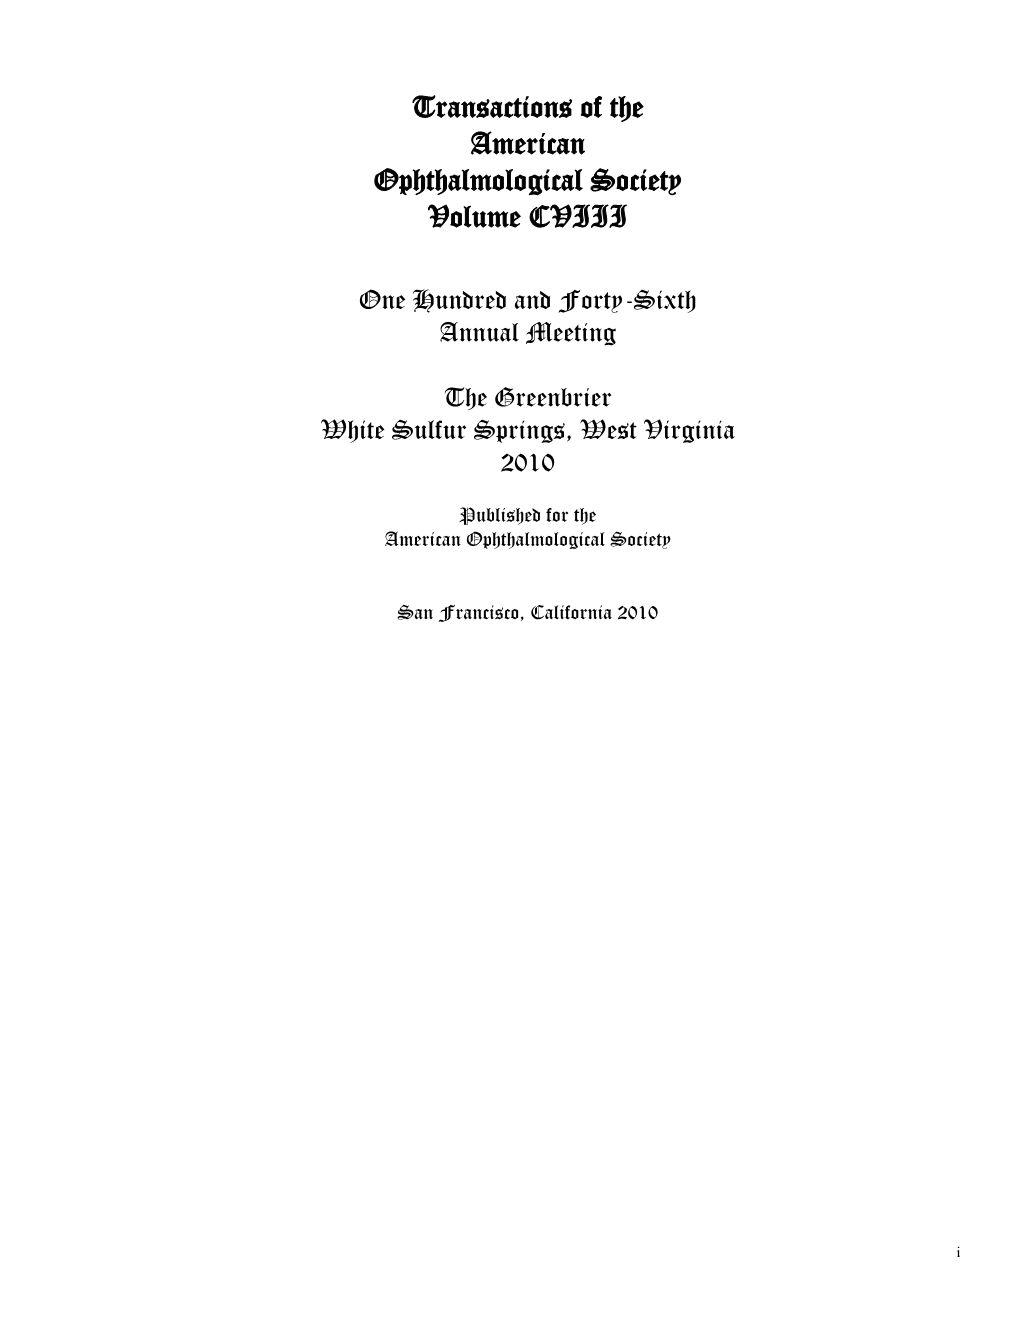 Transactions of the American Ophthalmological Society Volume CVIII